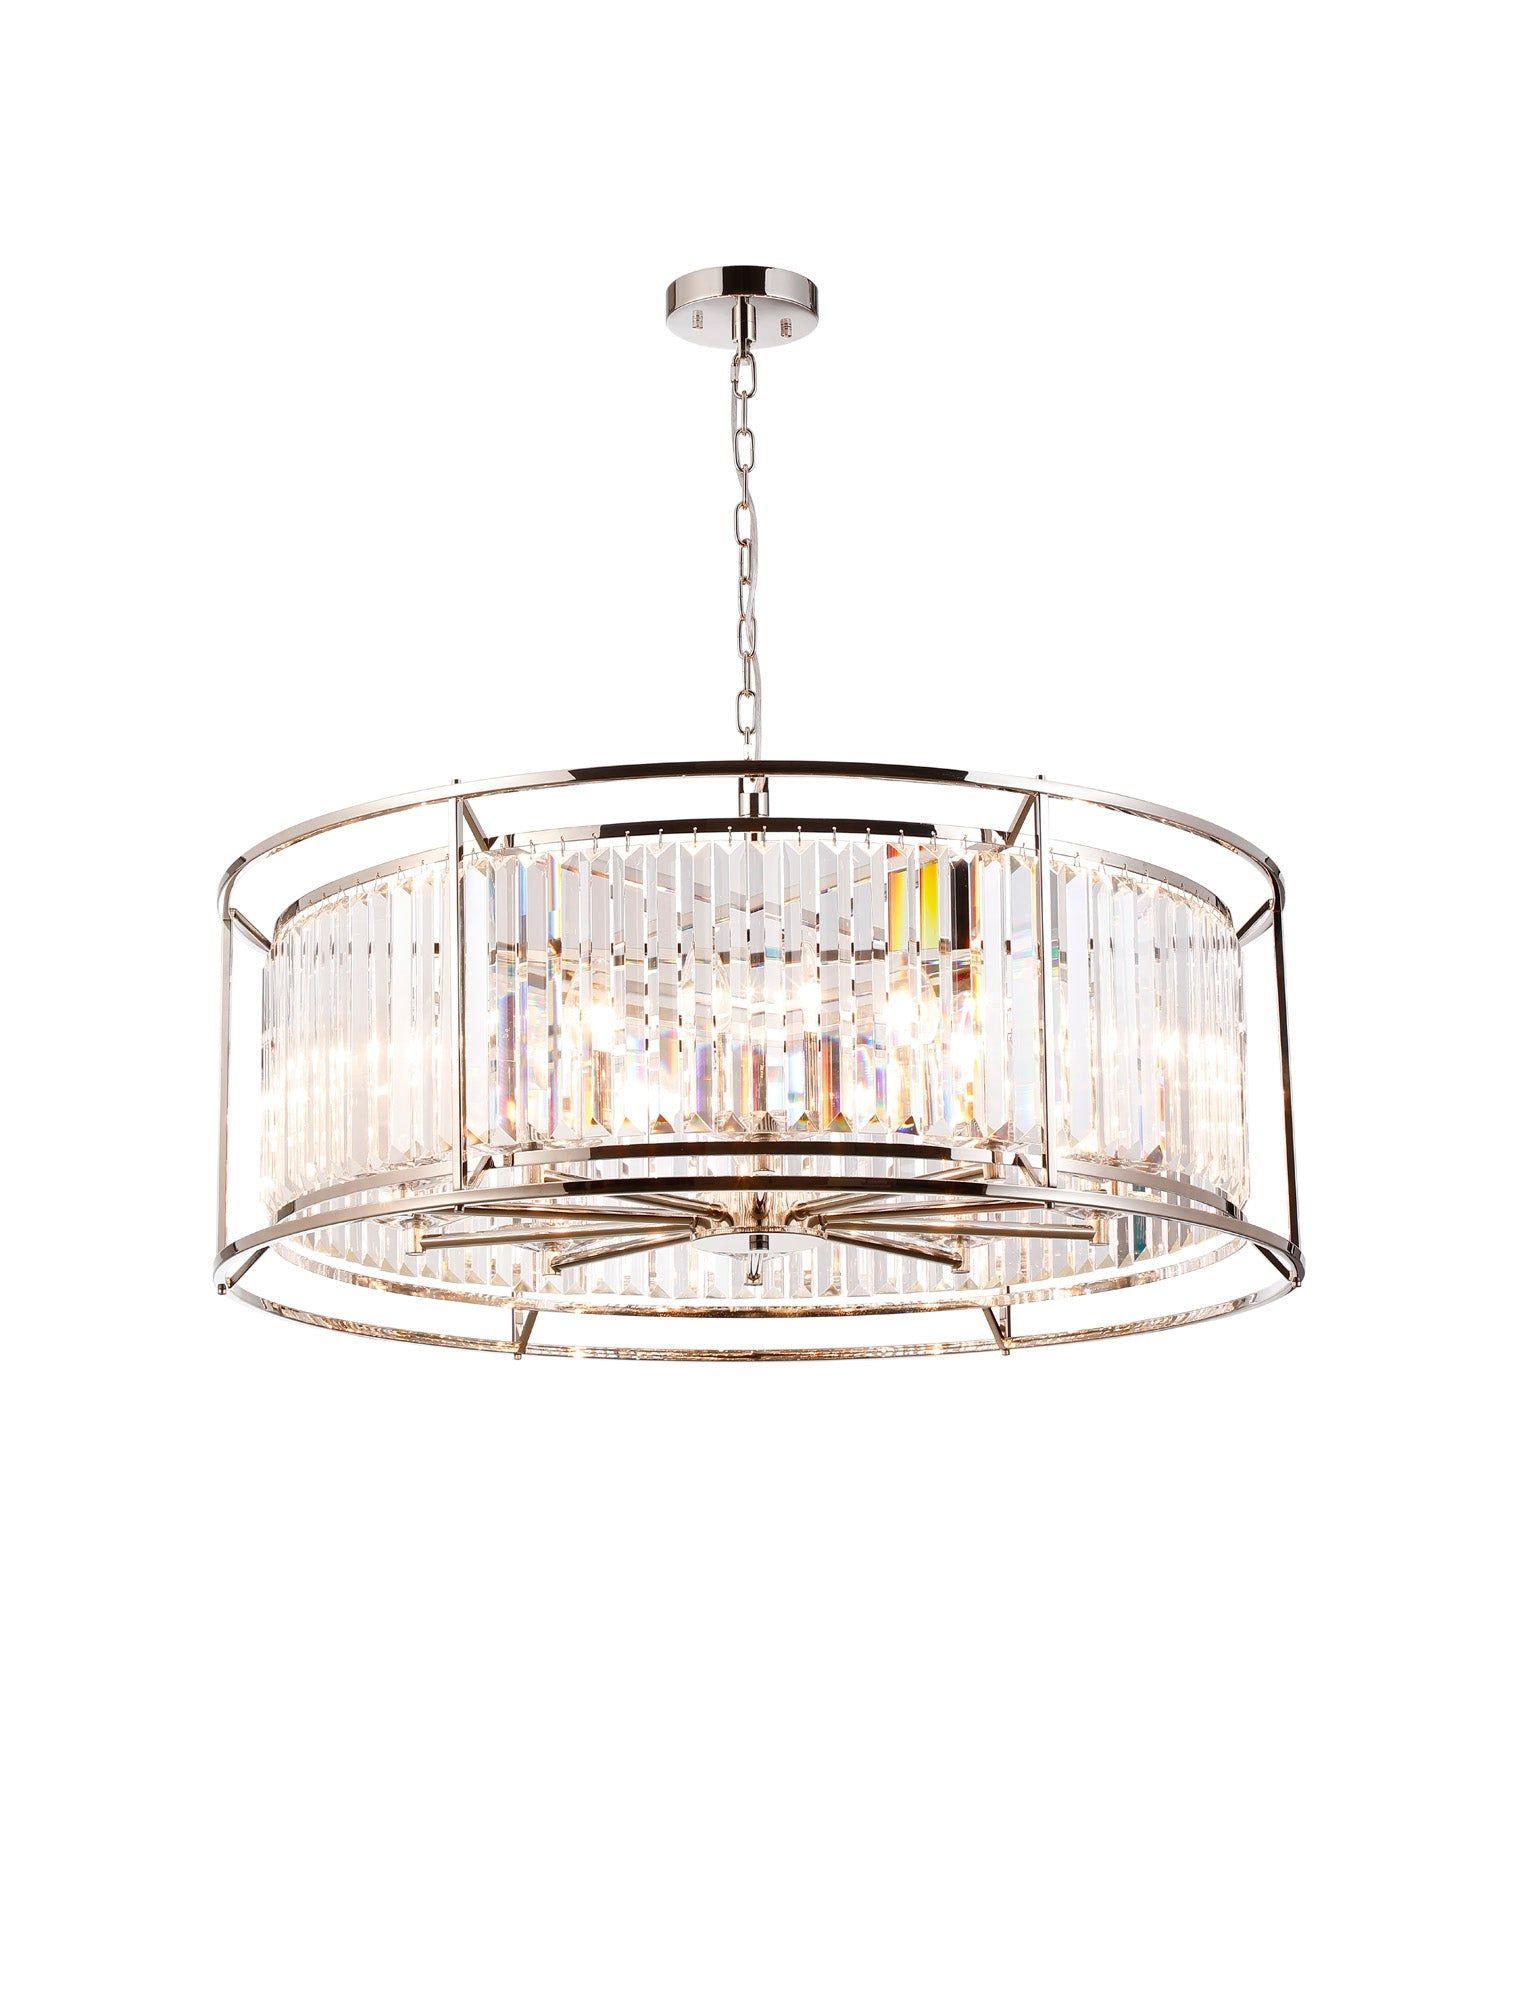 Belle Centre Ceiling Light/Semi Ceiling Convertible, 10Lt x E27 - Polished Nickel & Clear IP20